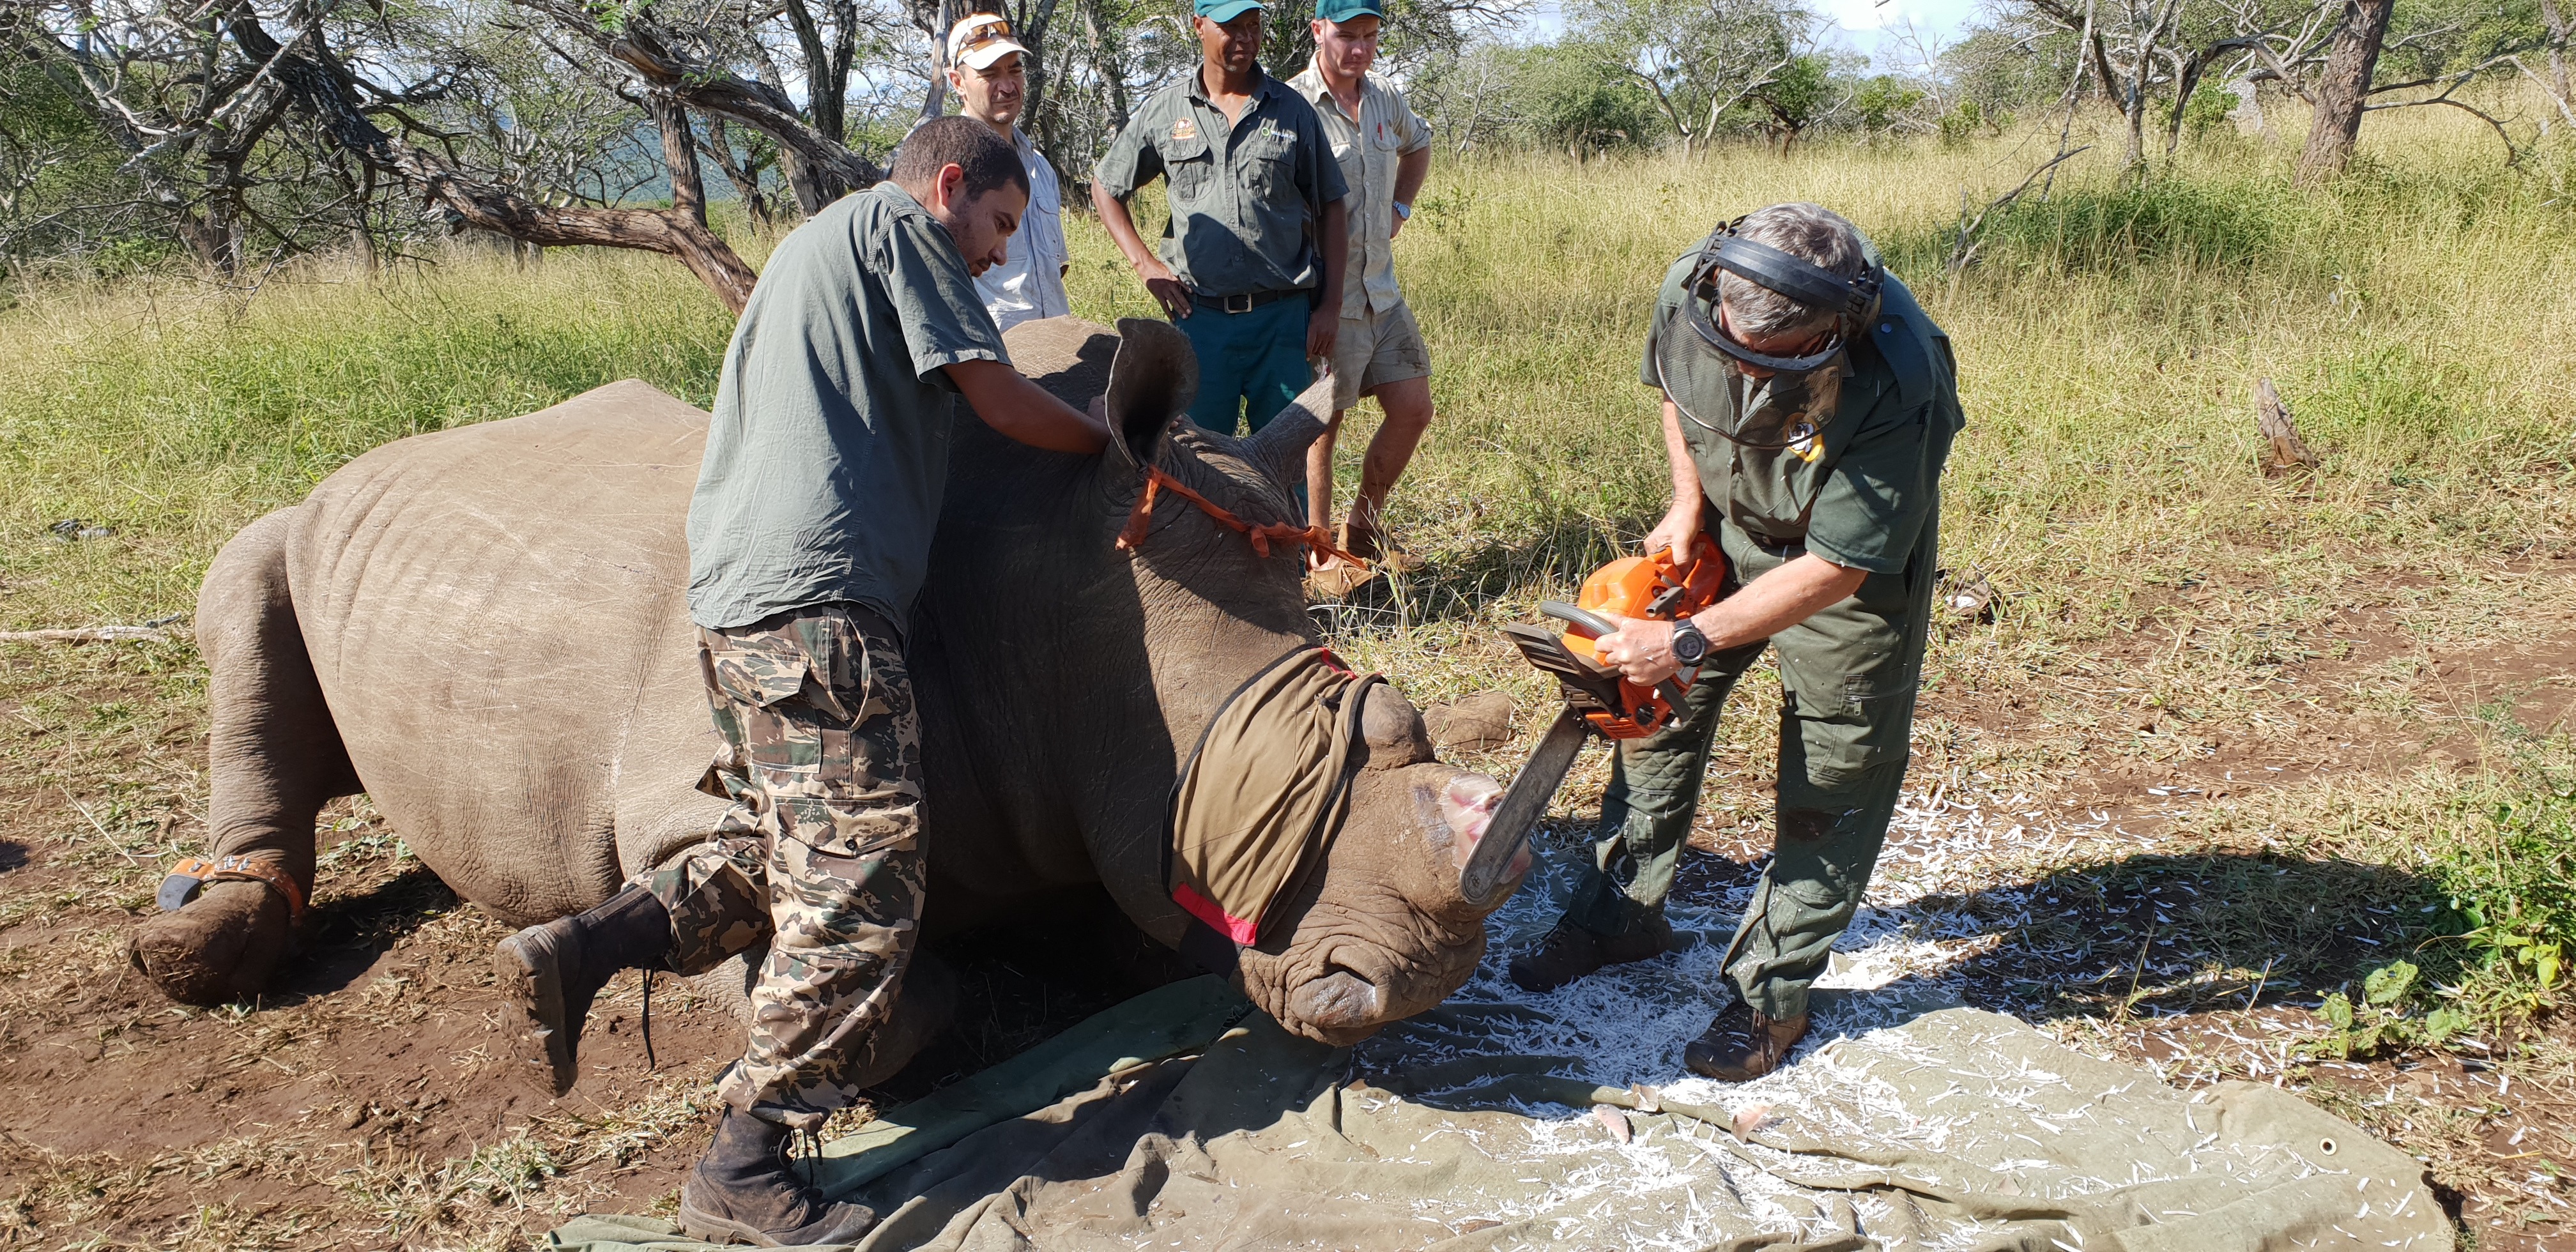 Rhino dehorning in South Africa: a necessary step to save rhinos and stop poaching